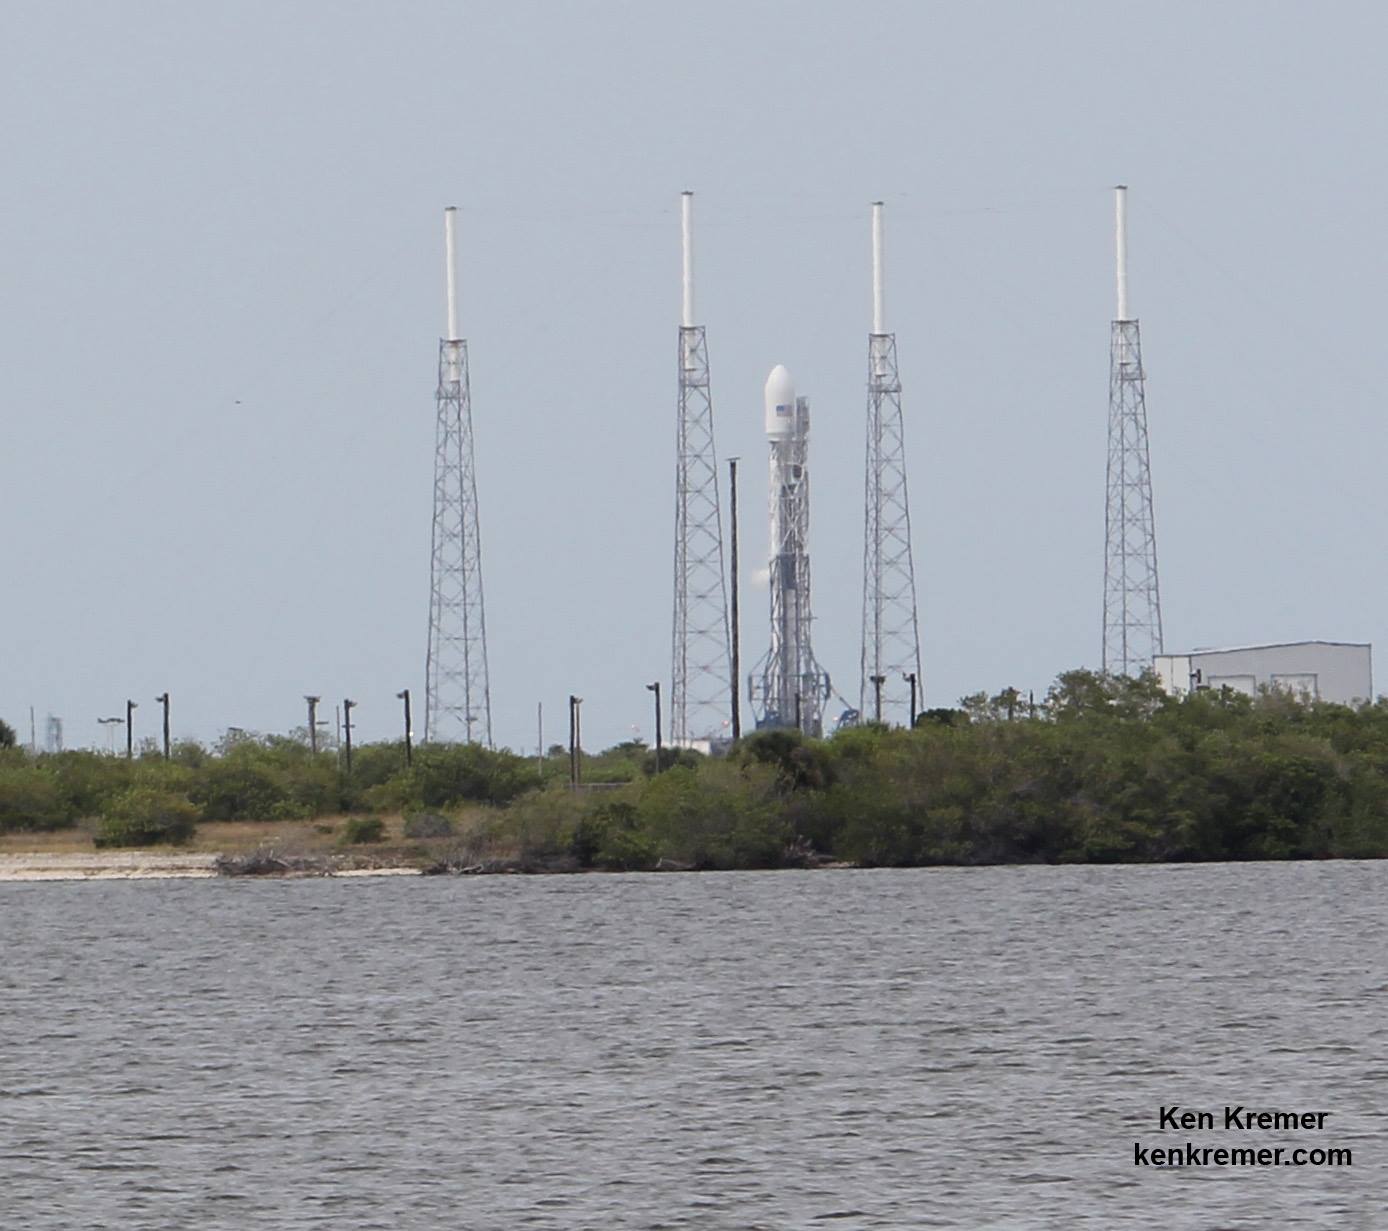 SpaceX's Falcon 9 v1.1 stands ready for its static hot-fire test on Friday, 13 June. Photo Credit: Ken Kremer